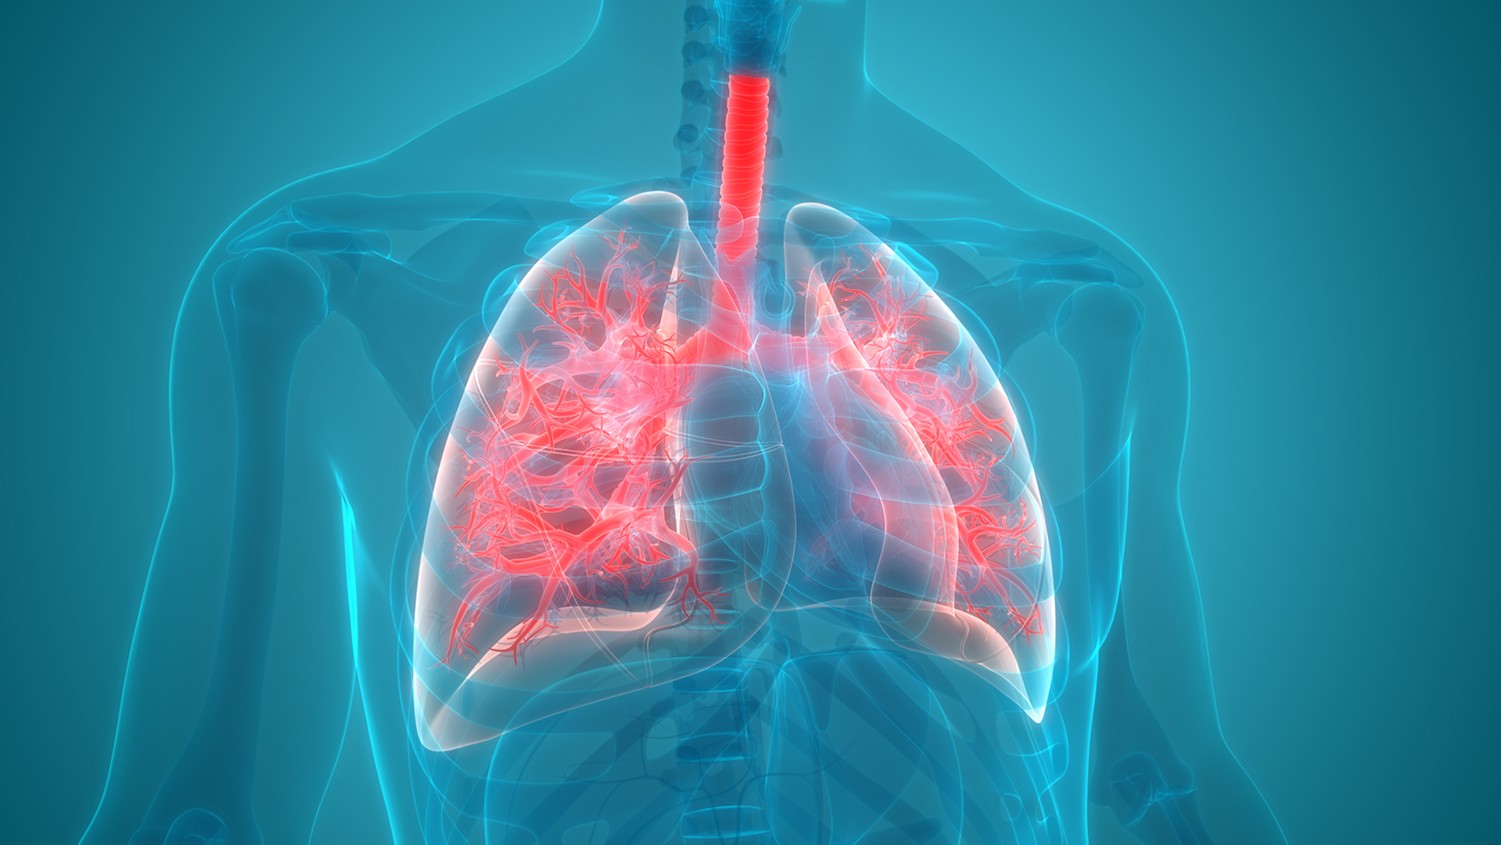 Community acquired pneumonia: diagnosis and management in adults